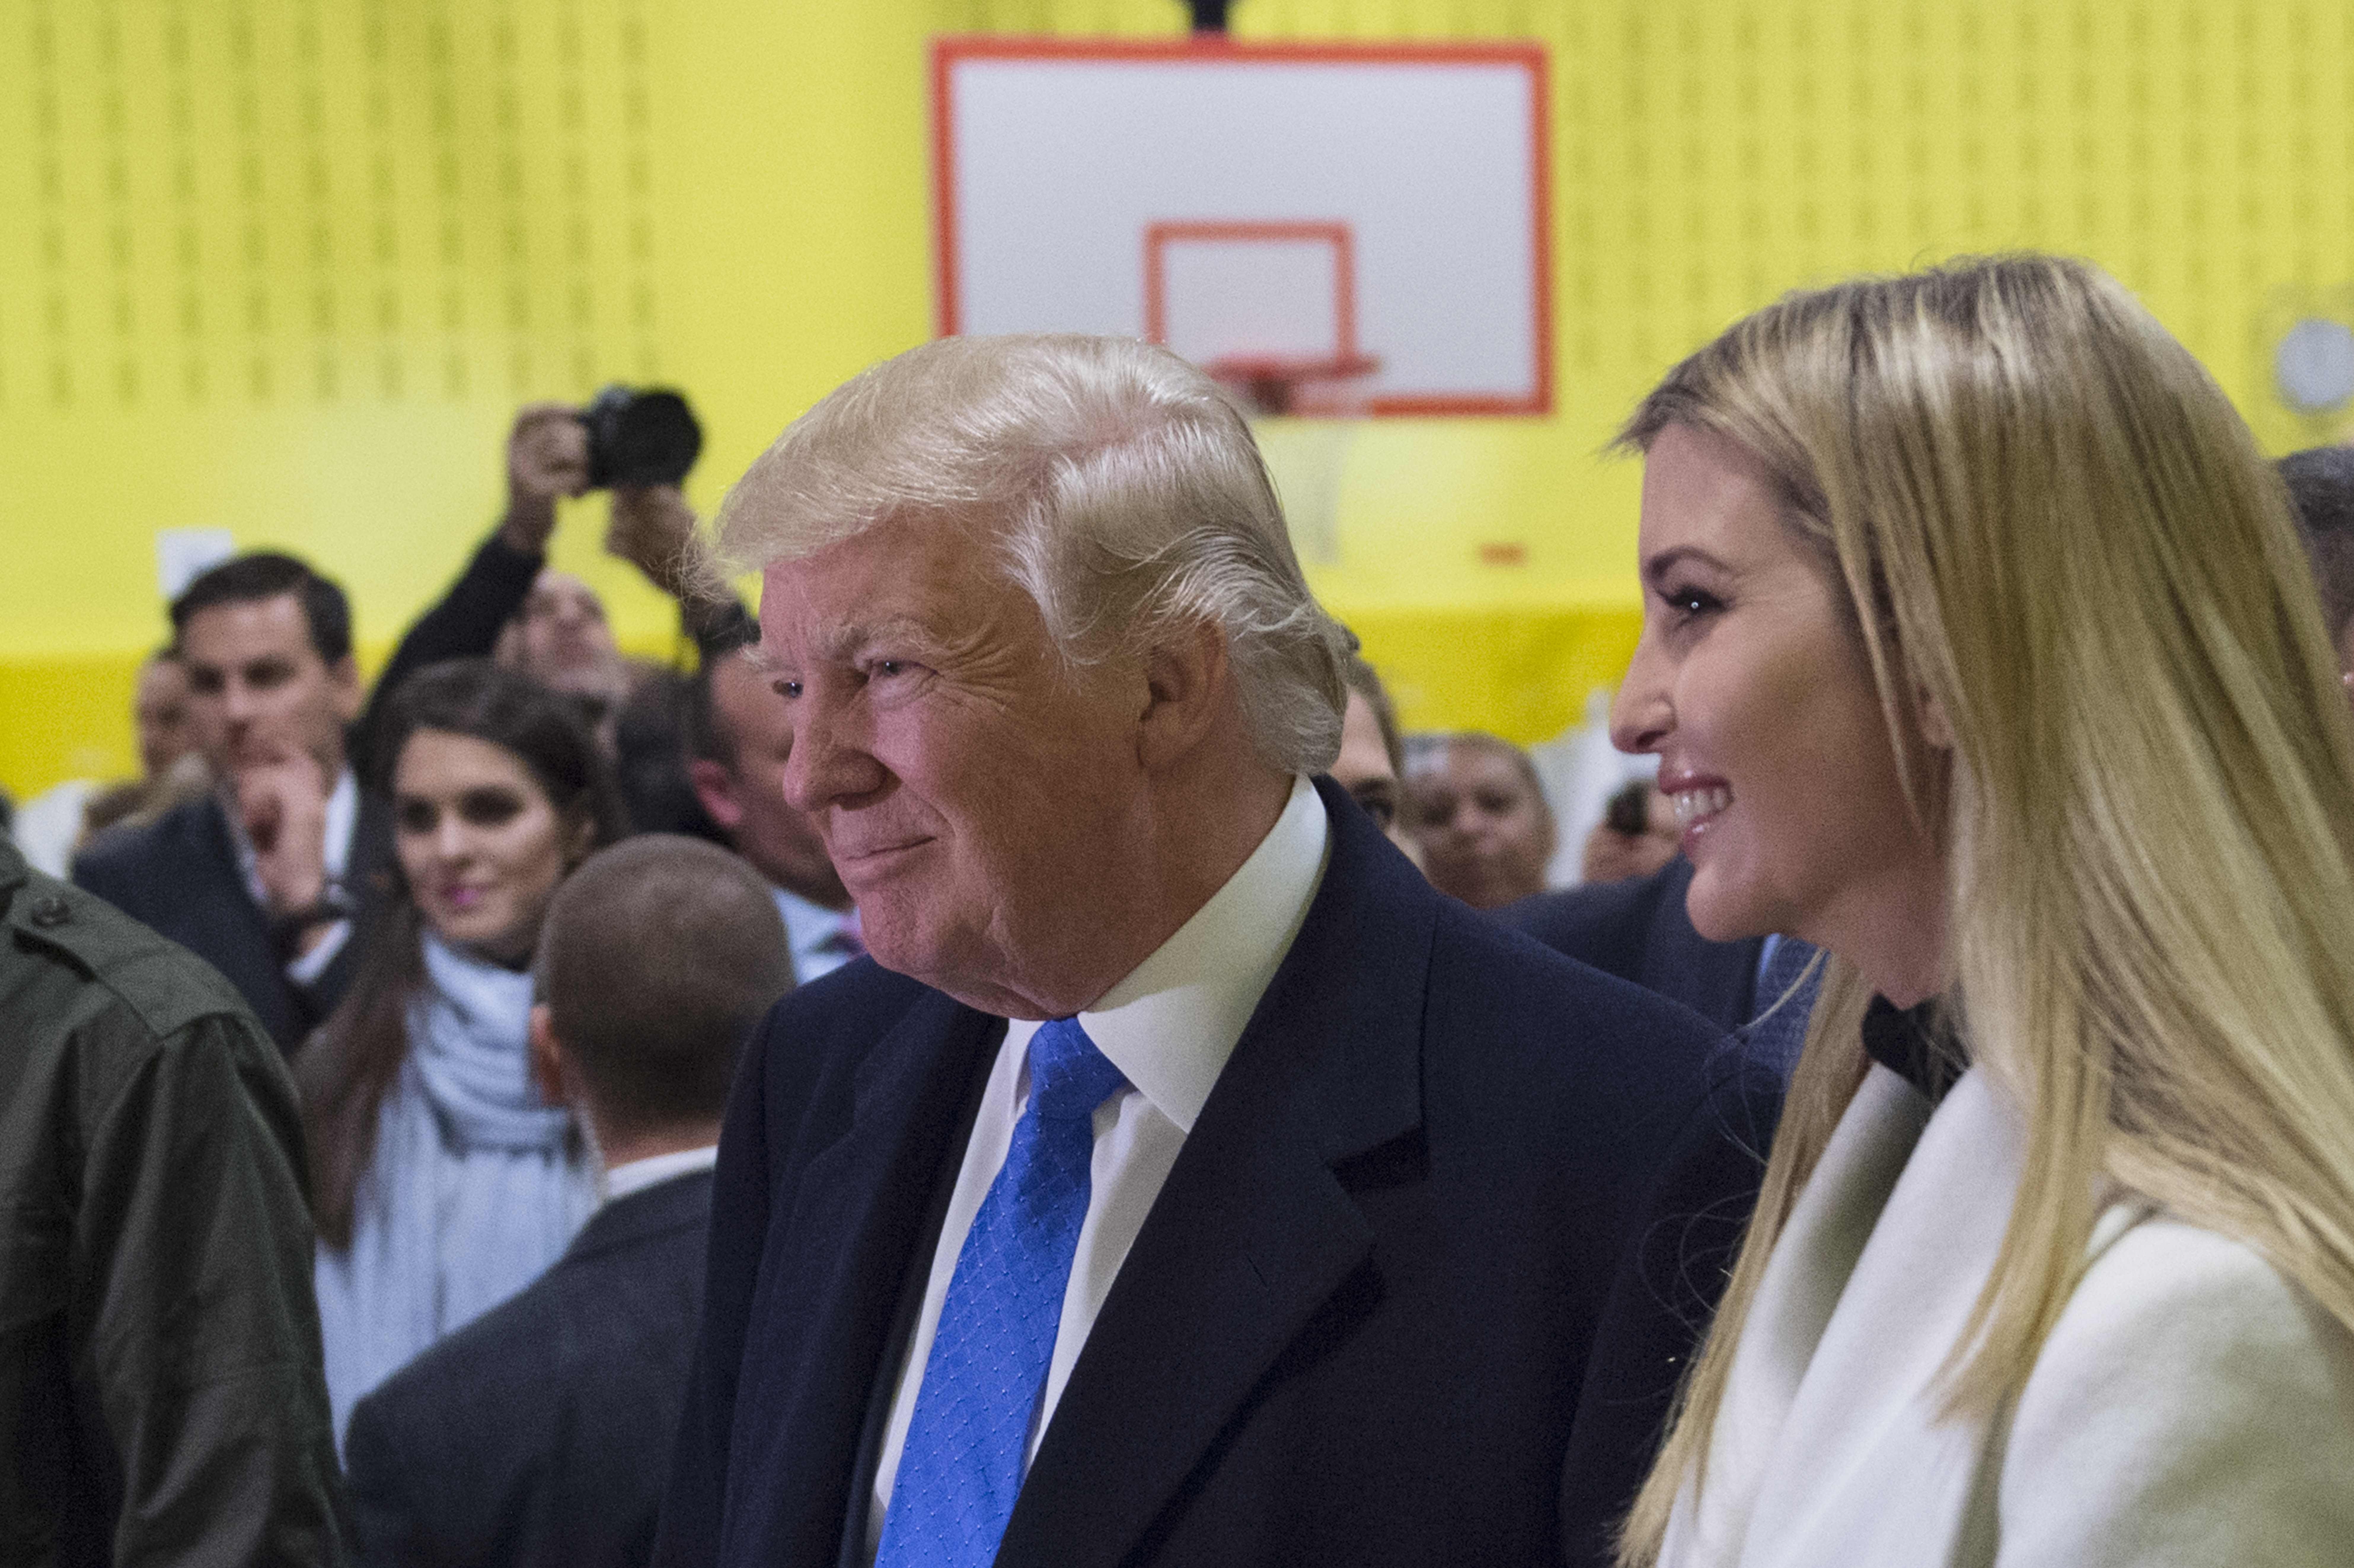 Another Major Retailer Is Dropping the Trump Family's Products